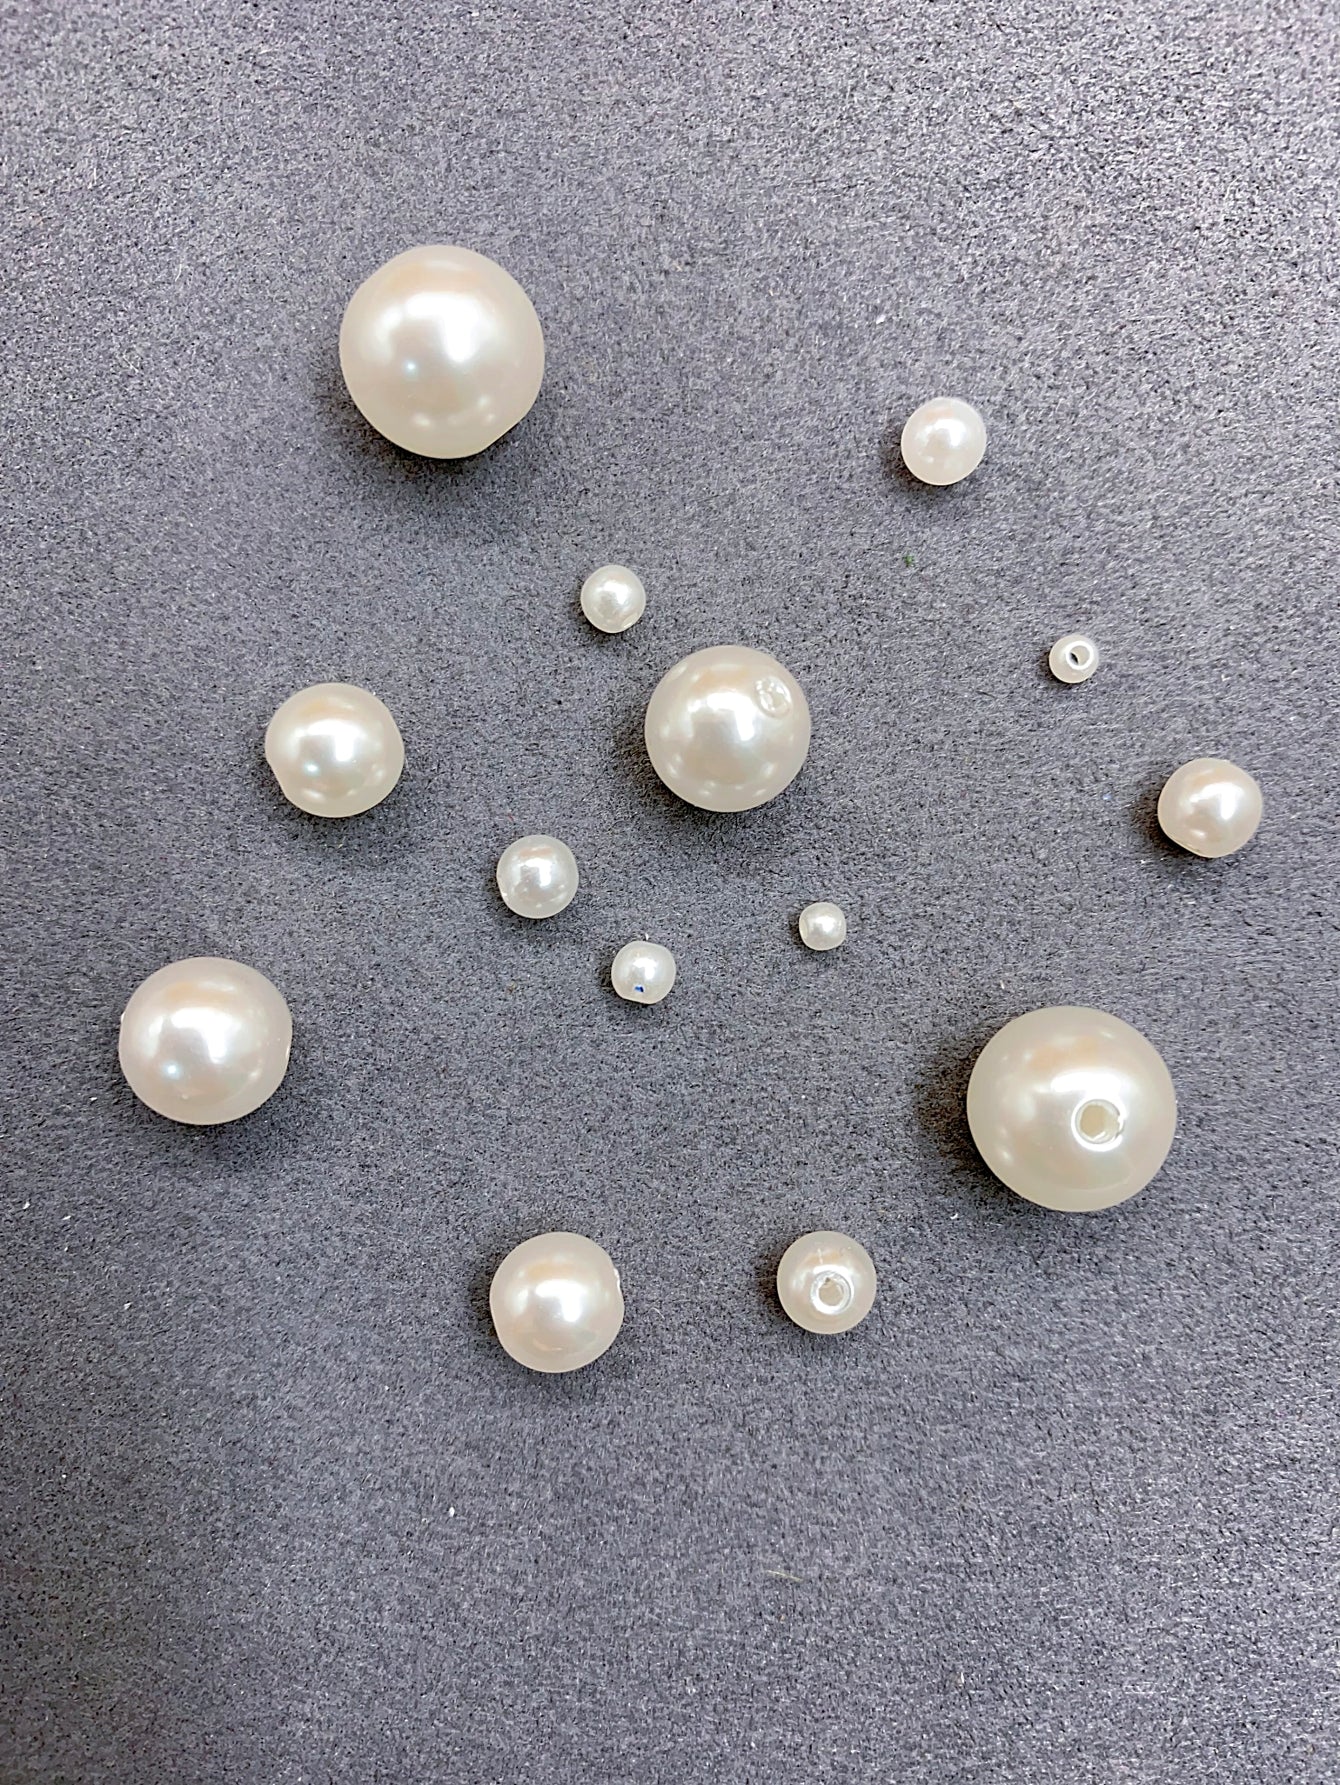 Bright ABS imitation pearl rice white pure white perforated pearl jewelry materials Clothing accessories Pearl jewelry accessories